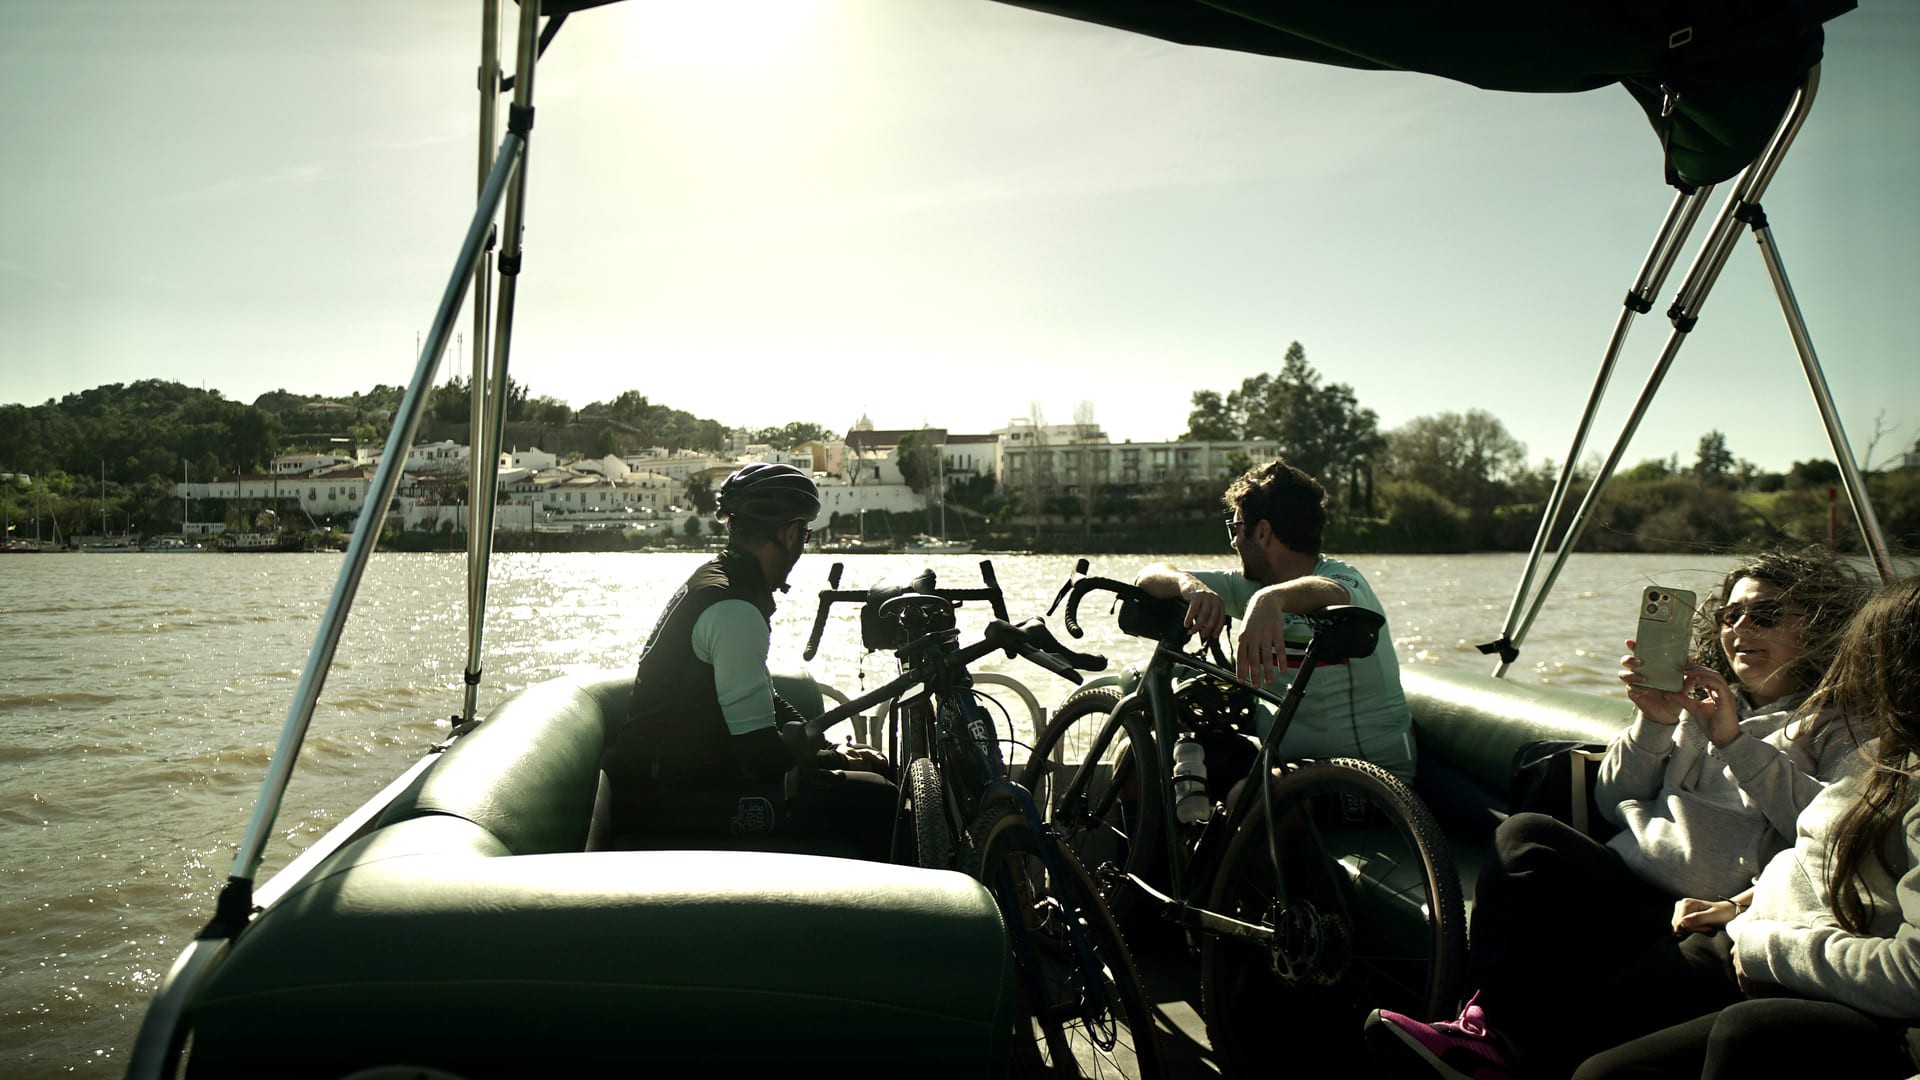 Gravel bike tour in Portugal - Cruise from Spain into the Algarve across the Guadiana river